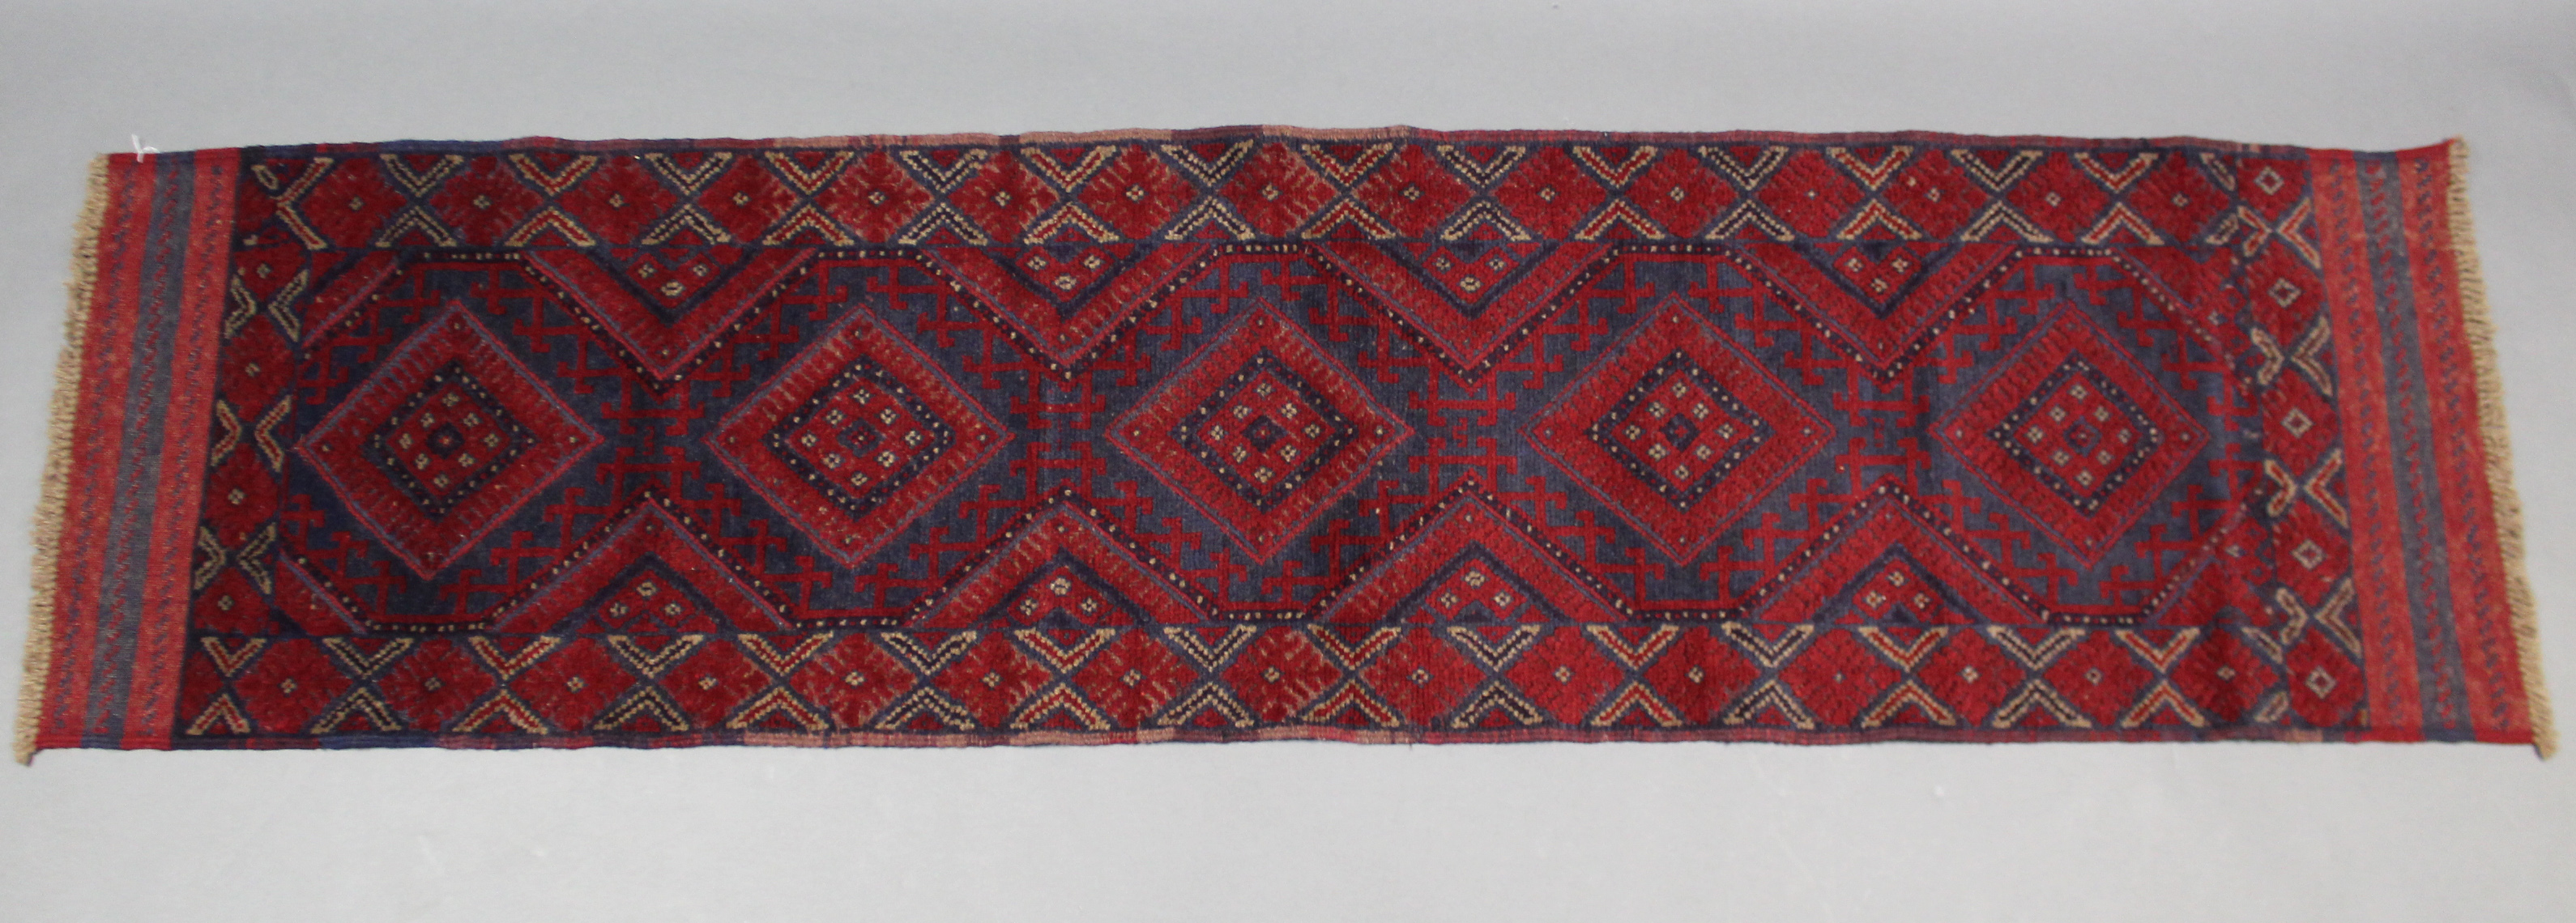 A Meshwari runner of deep blue, crimson, & ivory ground, with row of five lozenges in multiple